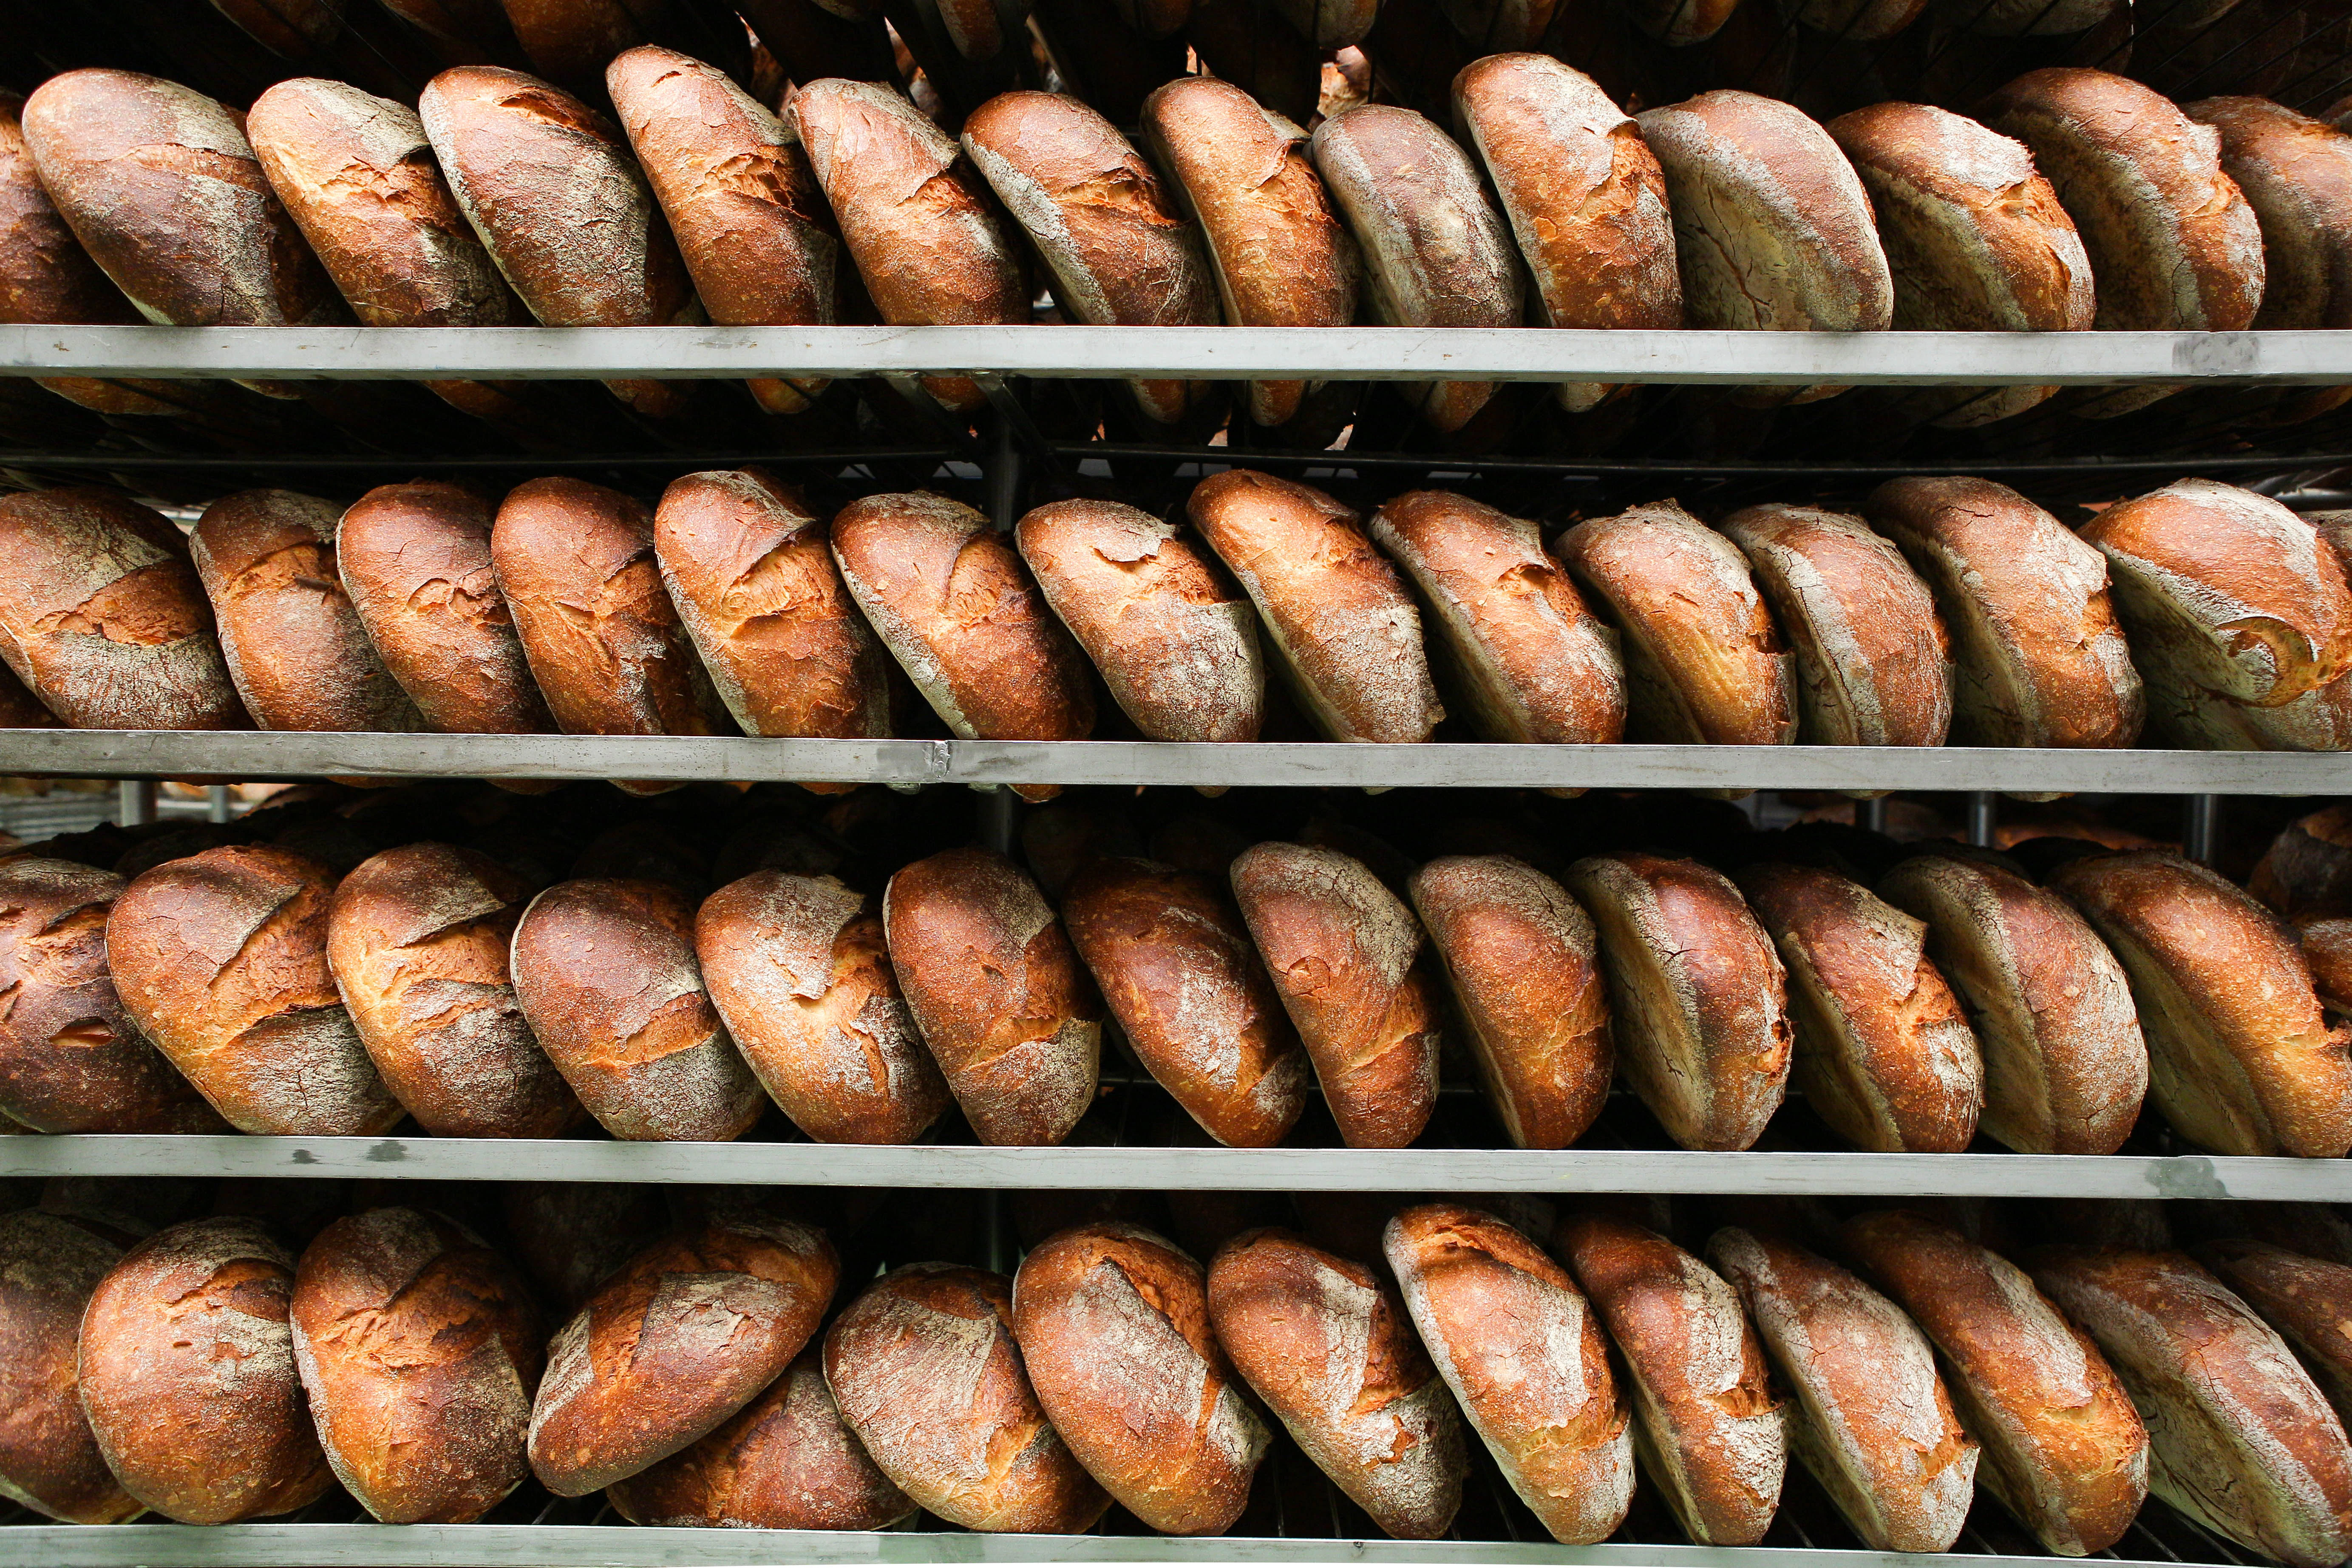 Four rows of Pane Pugliese are stacked vertically on cooling racks.